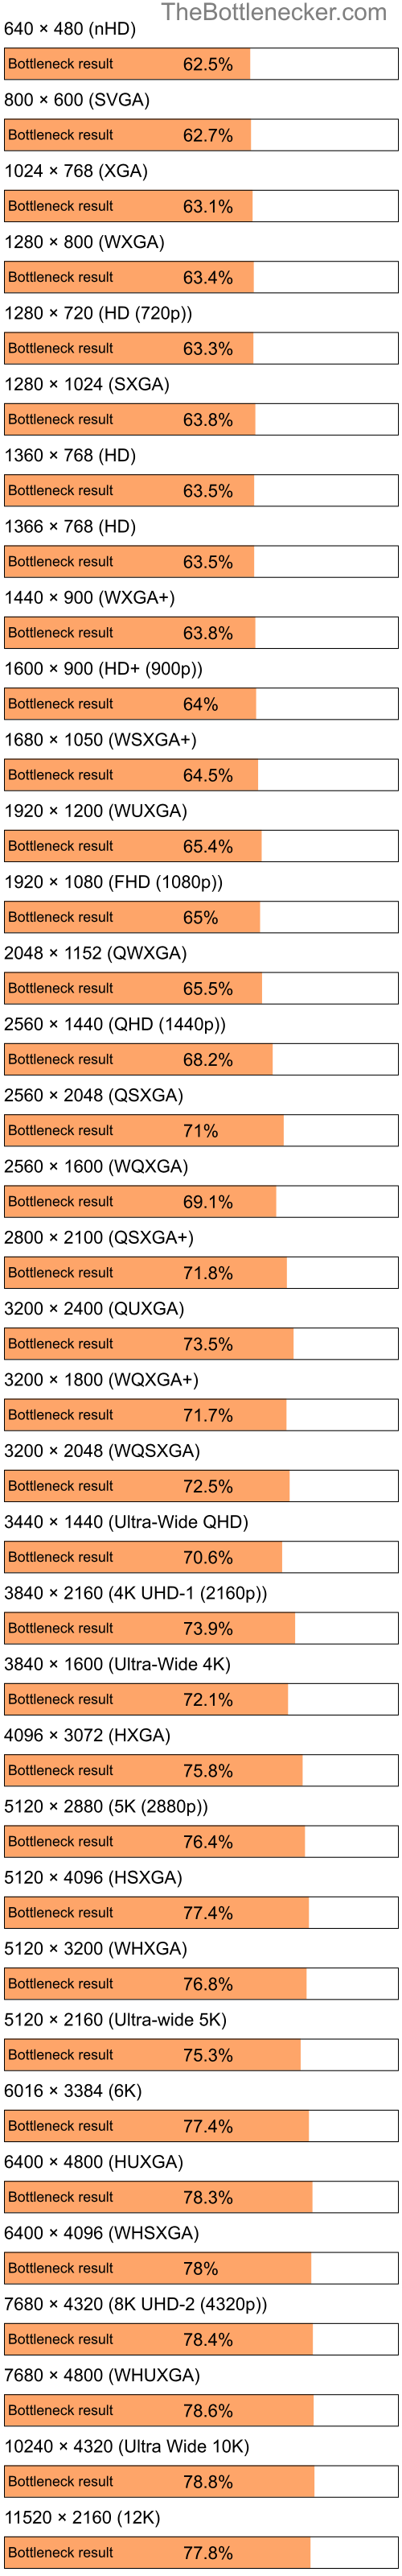 Bottleneck results by resolution for Intel Pentium 4 and AMD Radeon 3000 in General Tasks